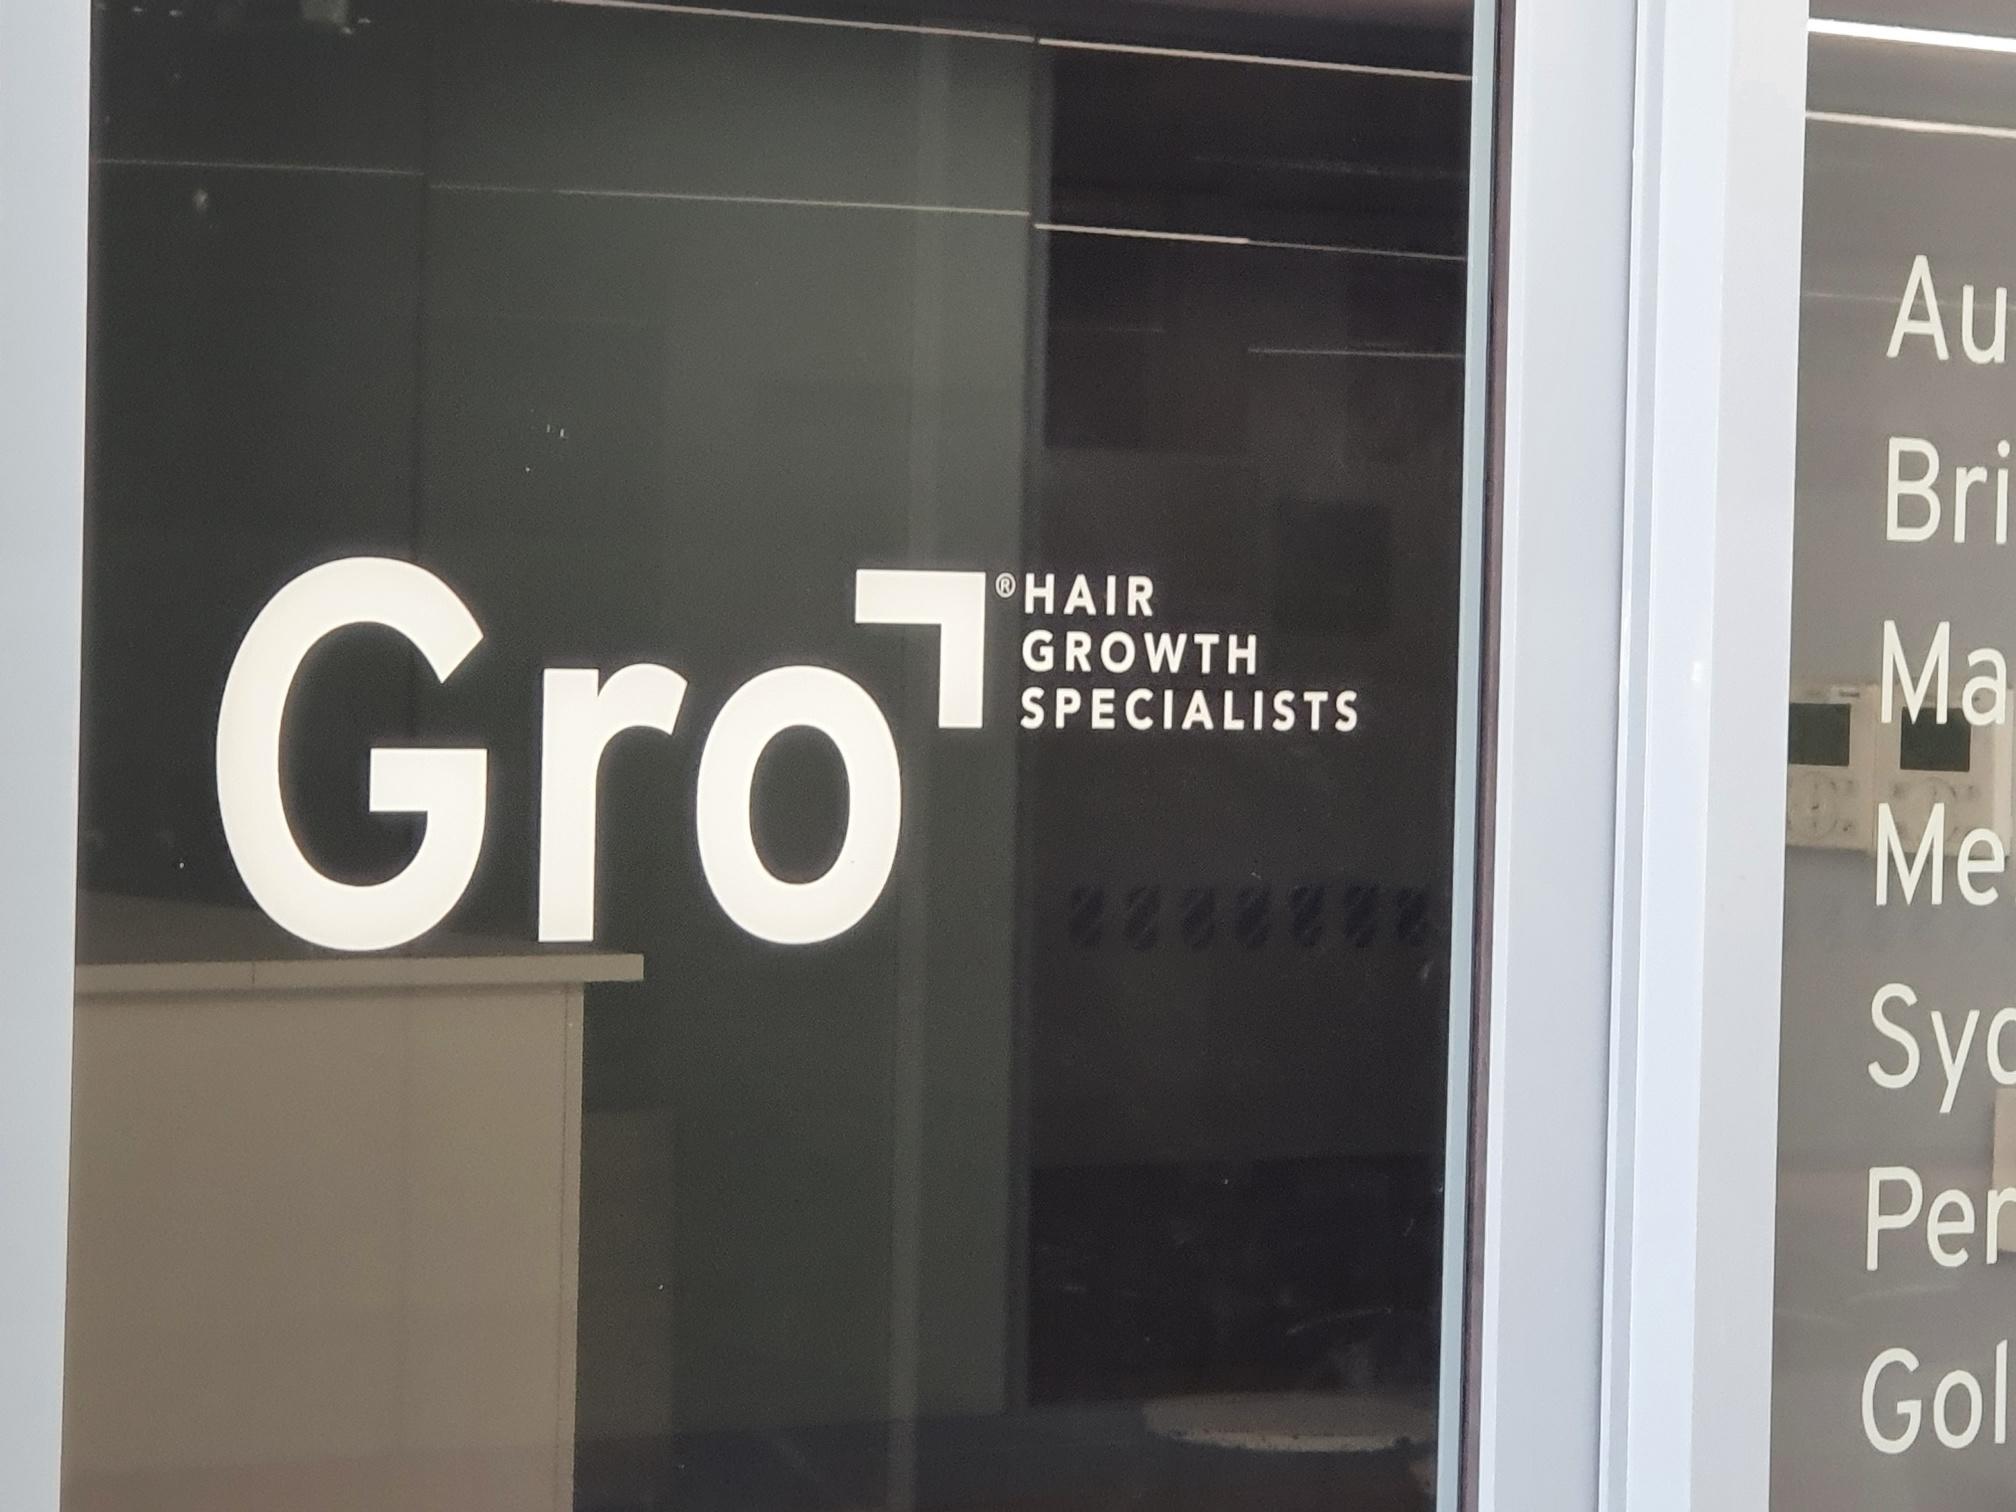 Images Gro - Perth Clinic